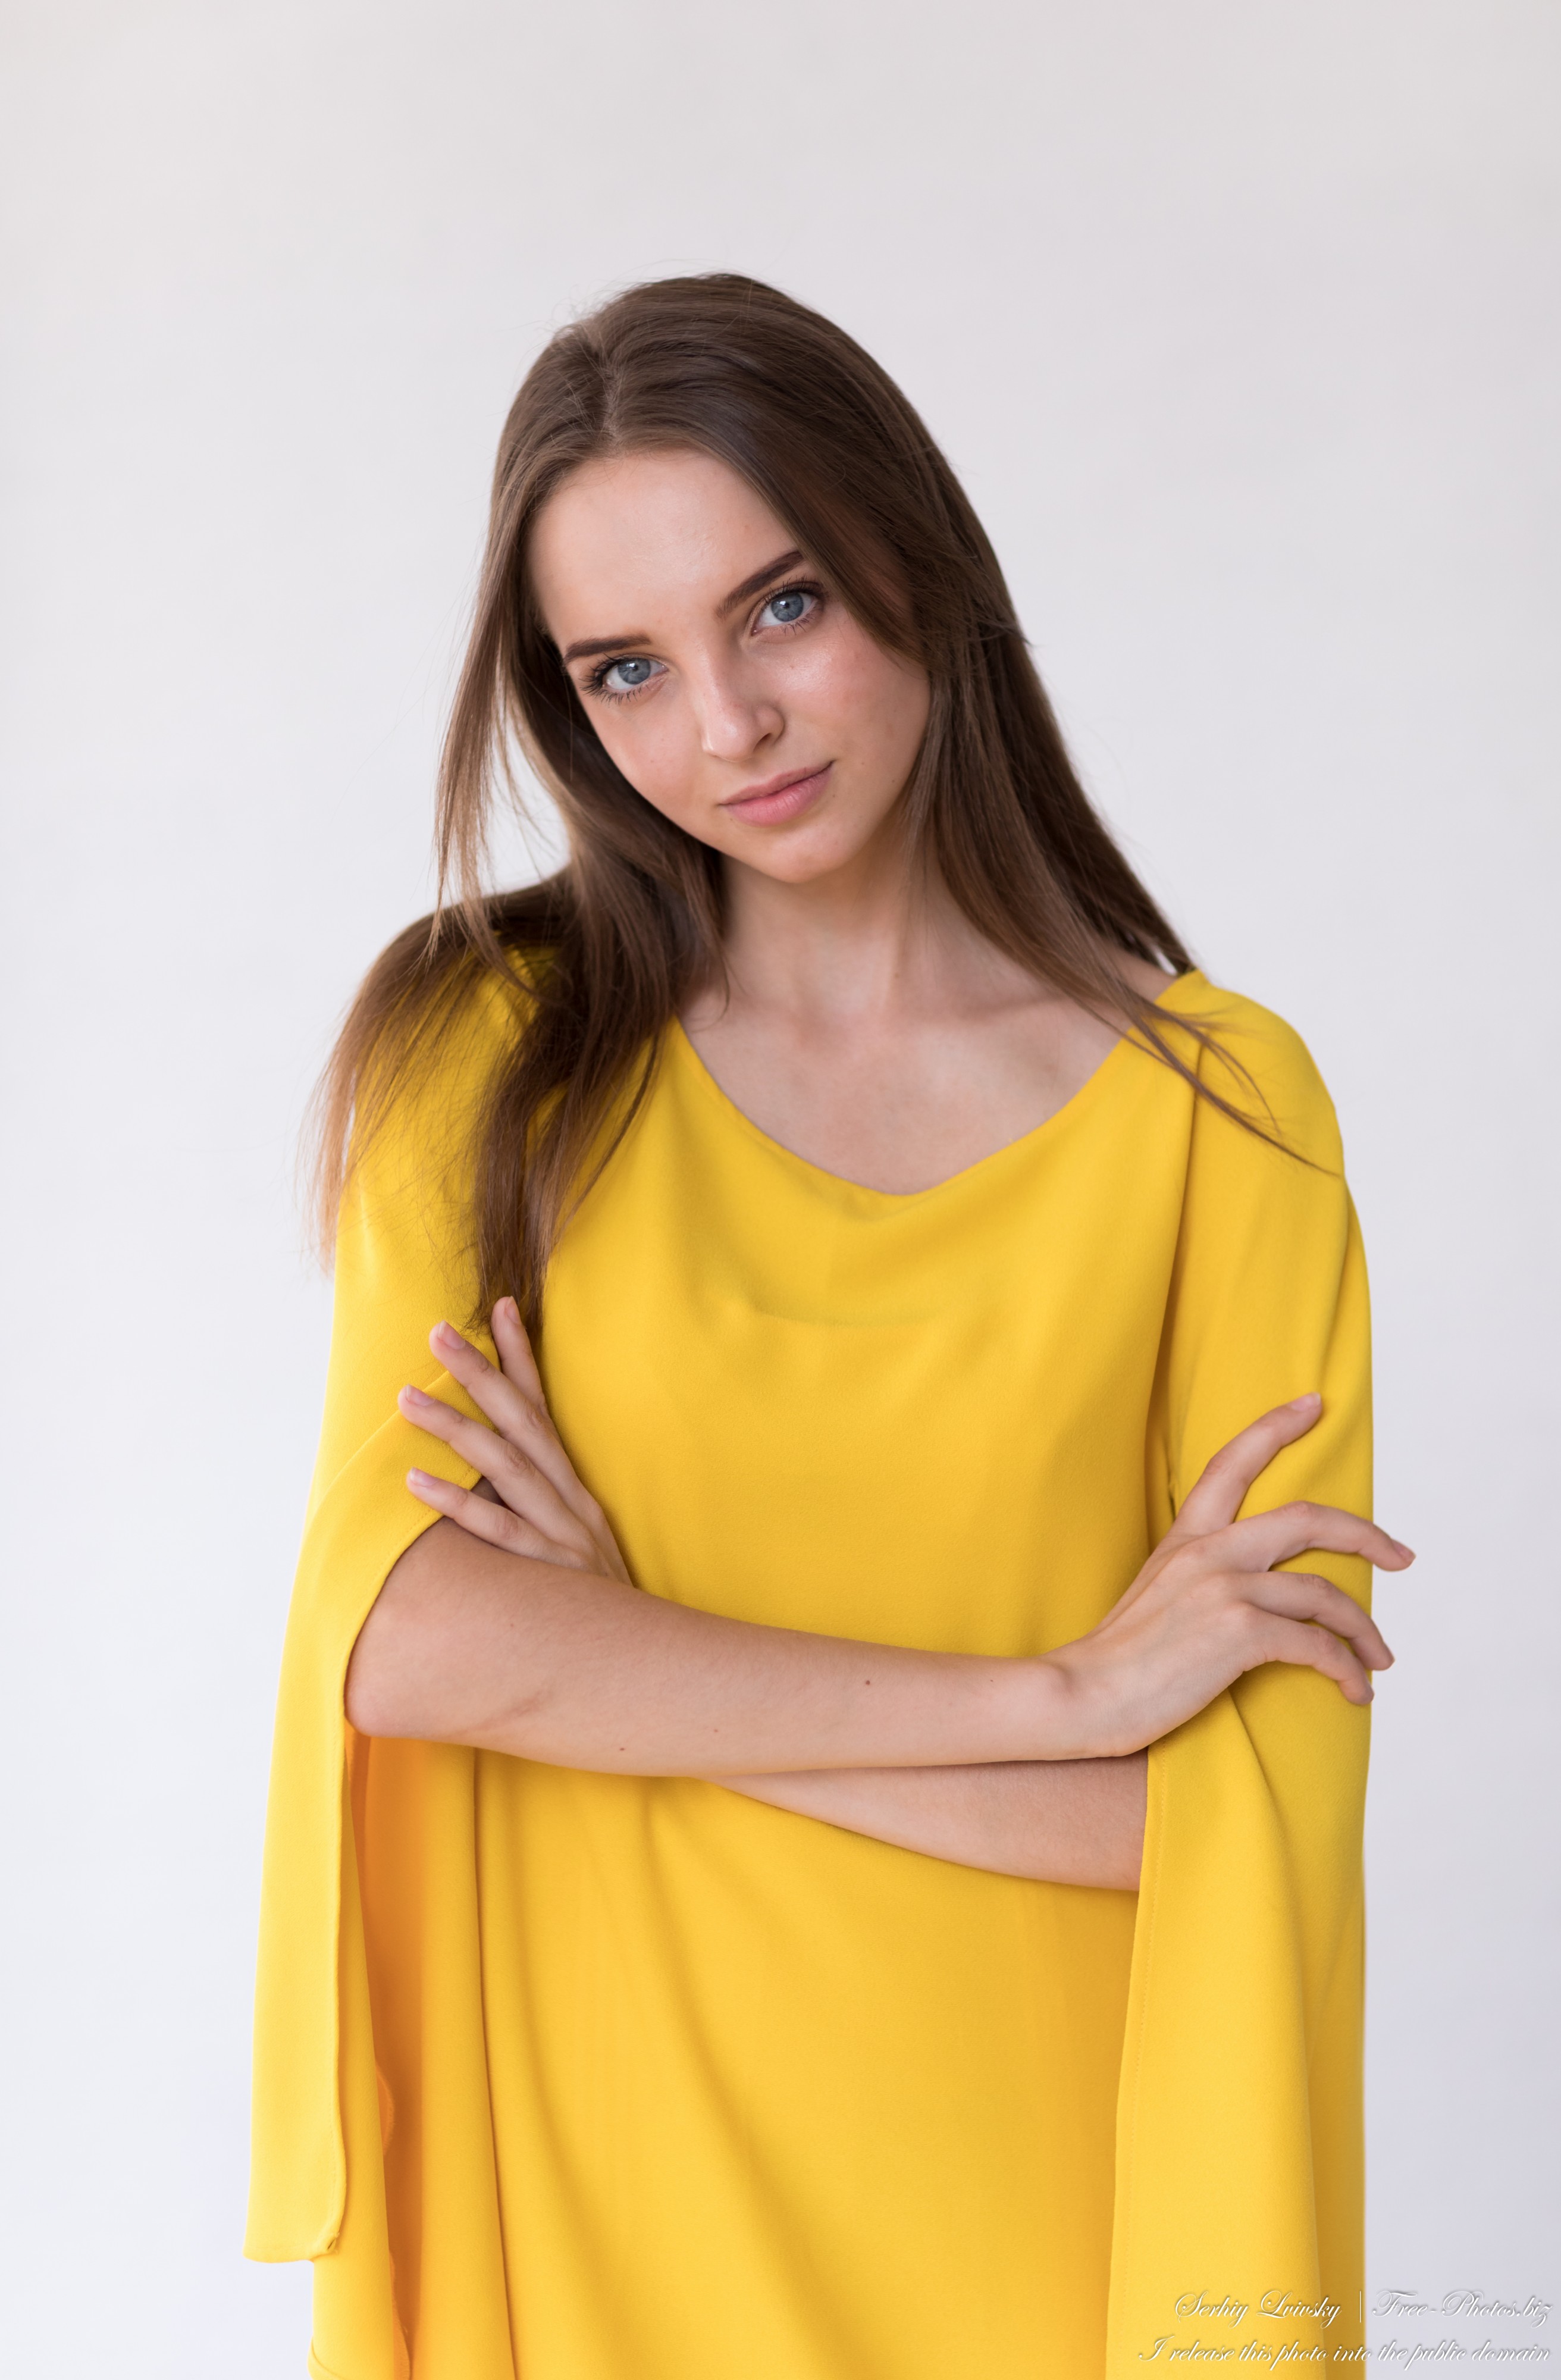 Photo Of Vika A 17 Year Old Brunette Girl Photographed By Serhiy Lvivsky In September 2020